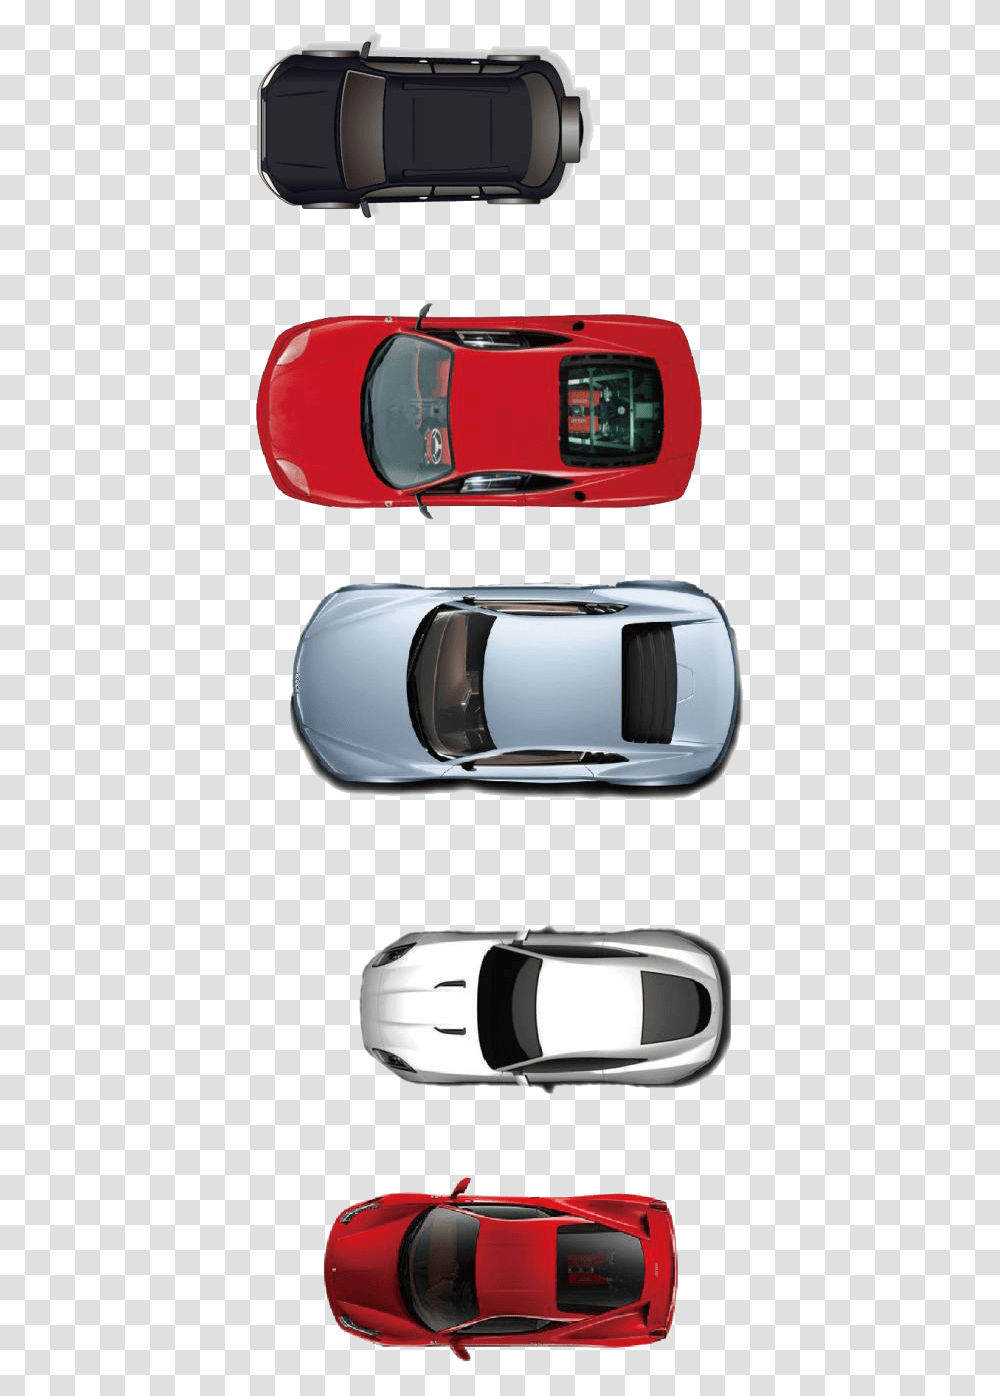 Download Car Top View Hd Image Free Clipart Plan View Cars Top View, Bumper, Vehicle, Transportation, Boat Transparent Png